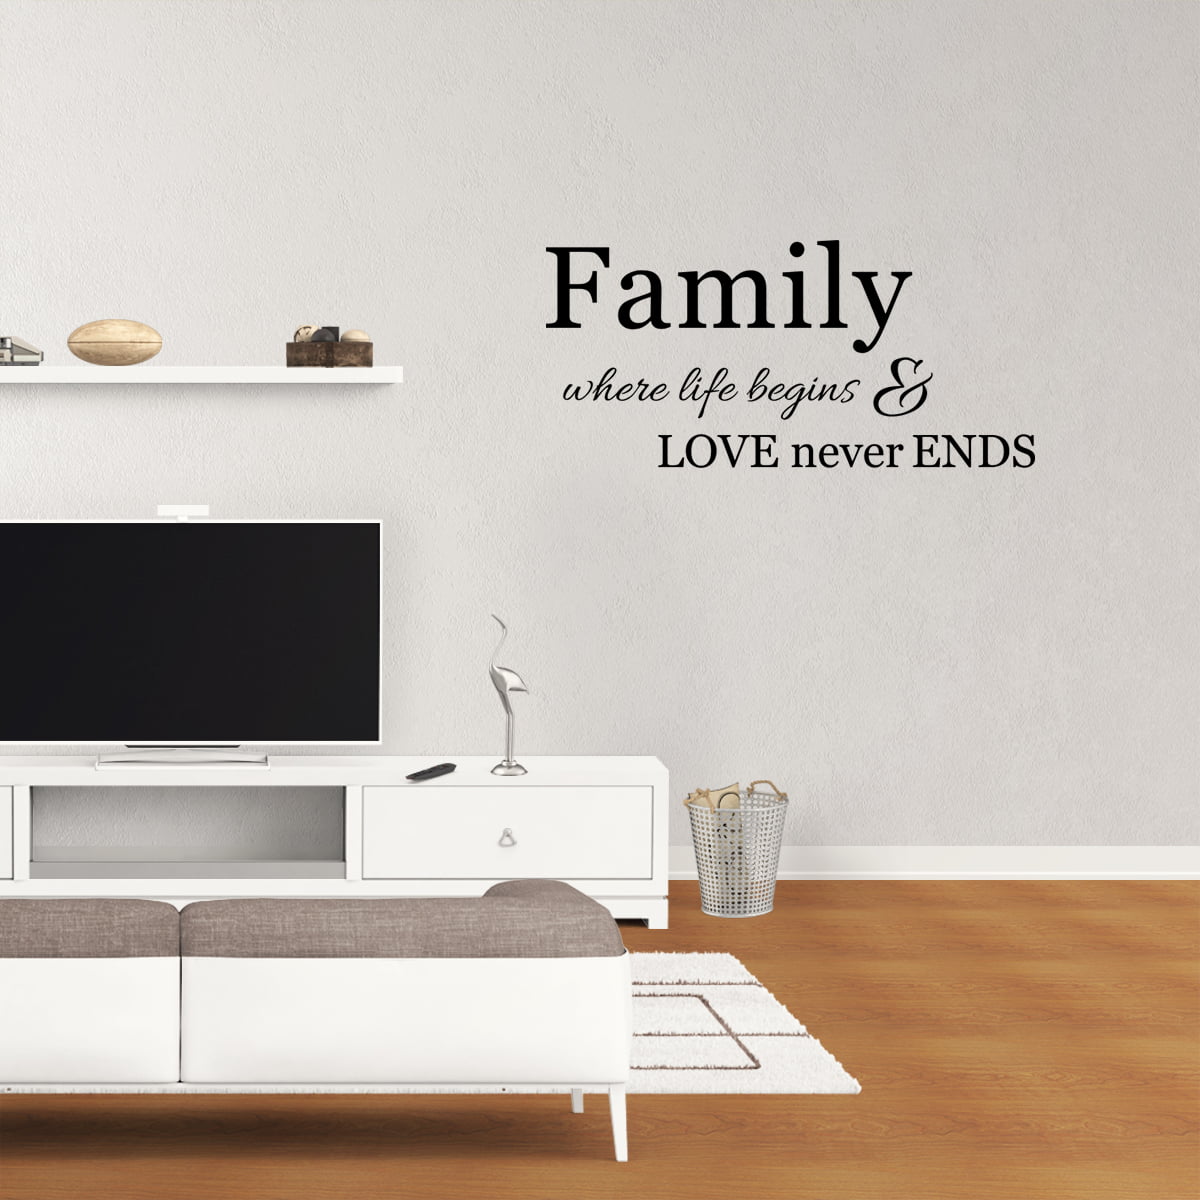 FAMILY LIFE BEGINS LOVE NEVER ENDS wall quote decor sticker transfer vinyl 